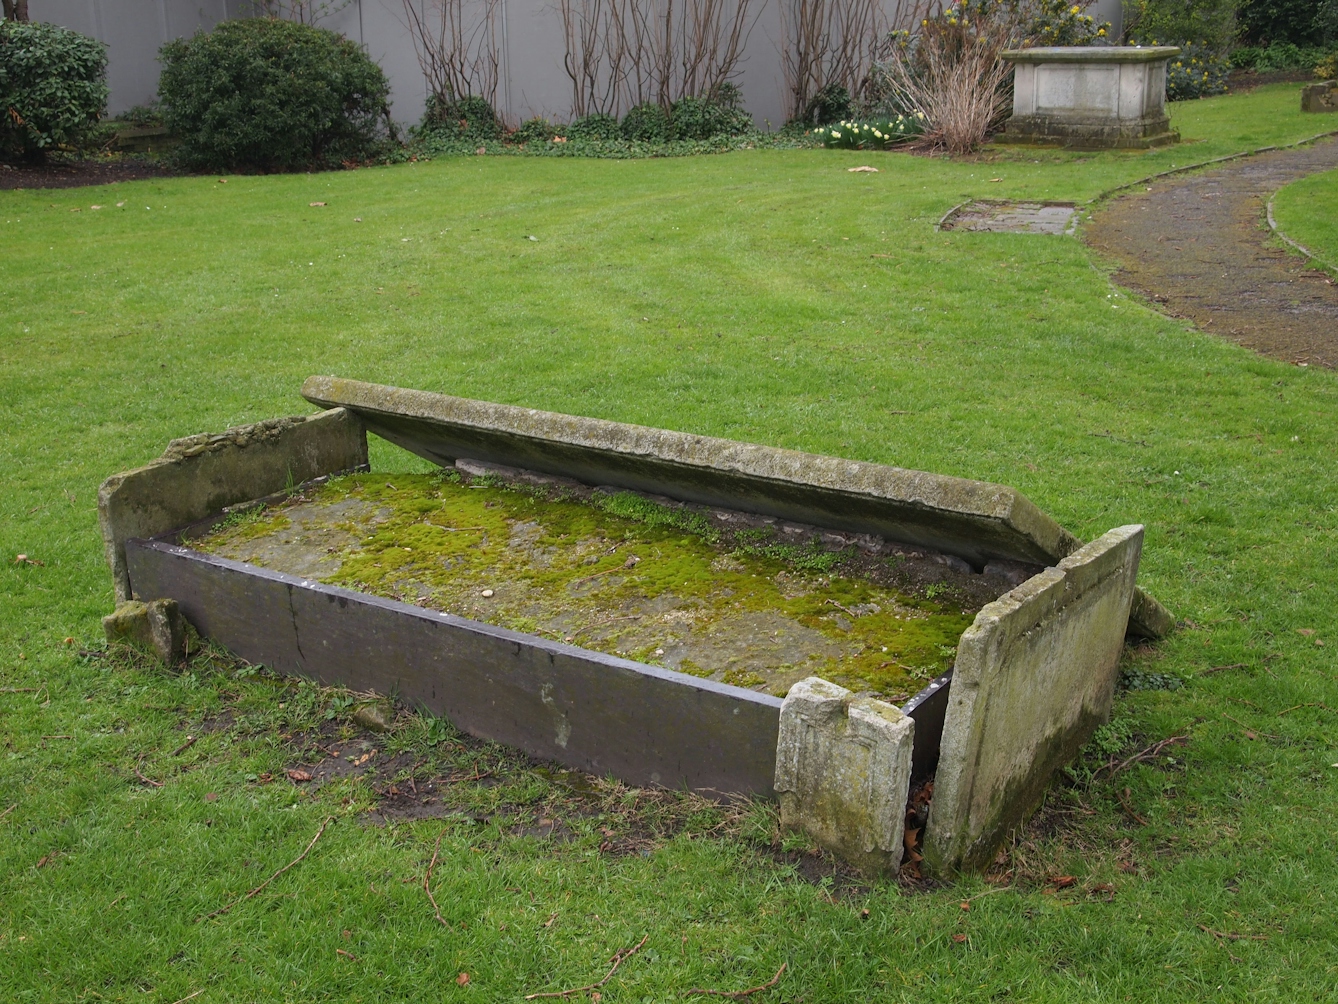 Photograph of a grave in St James's Gardens.  The stone from the top of the grave has been dislodged exposing the earth beneath it.